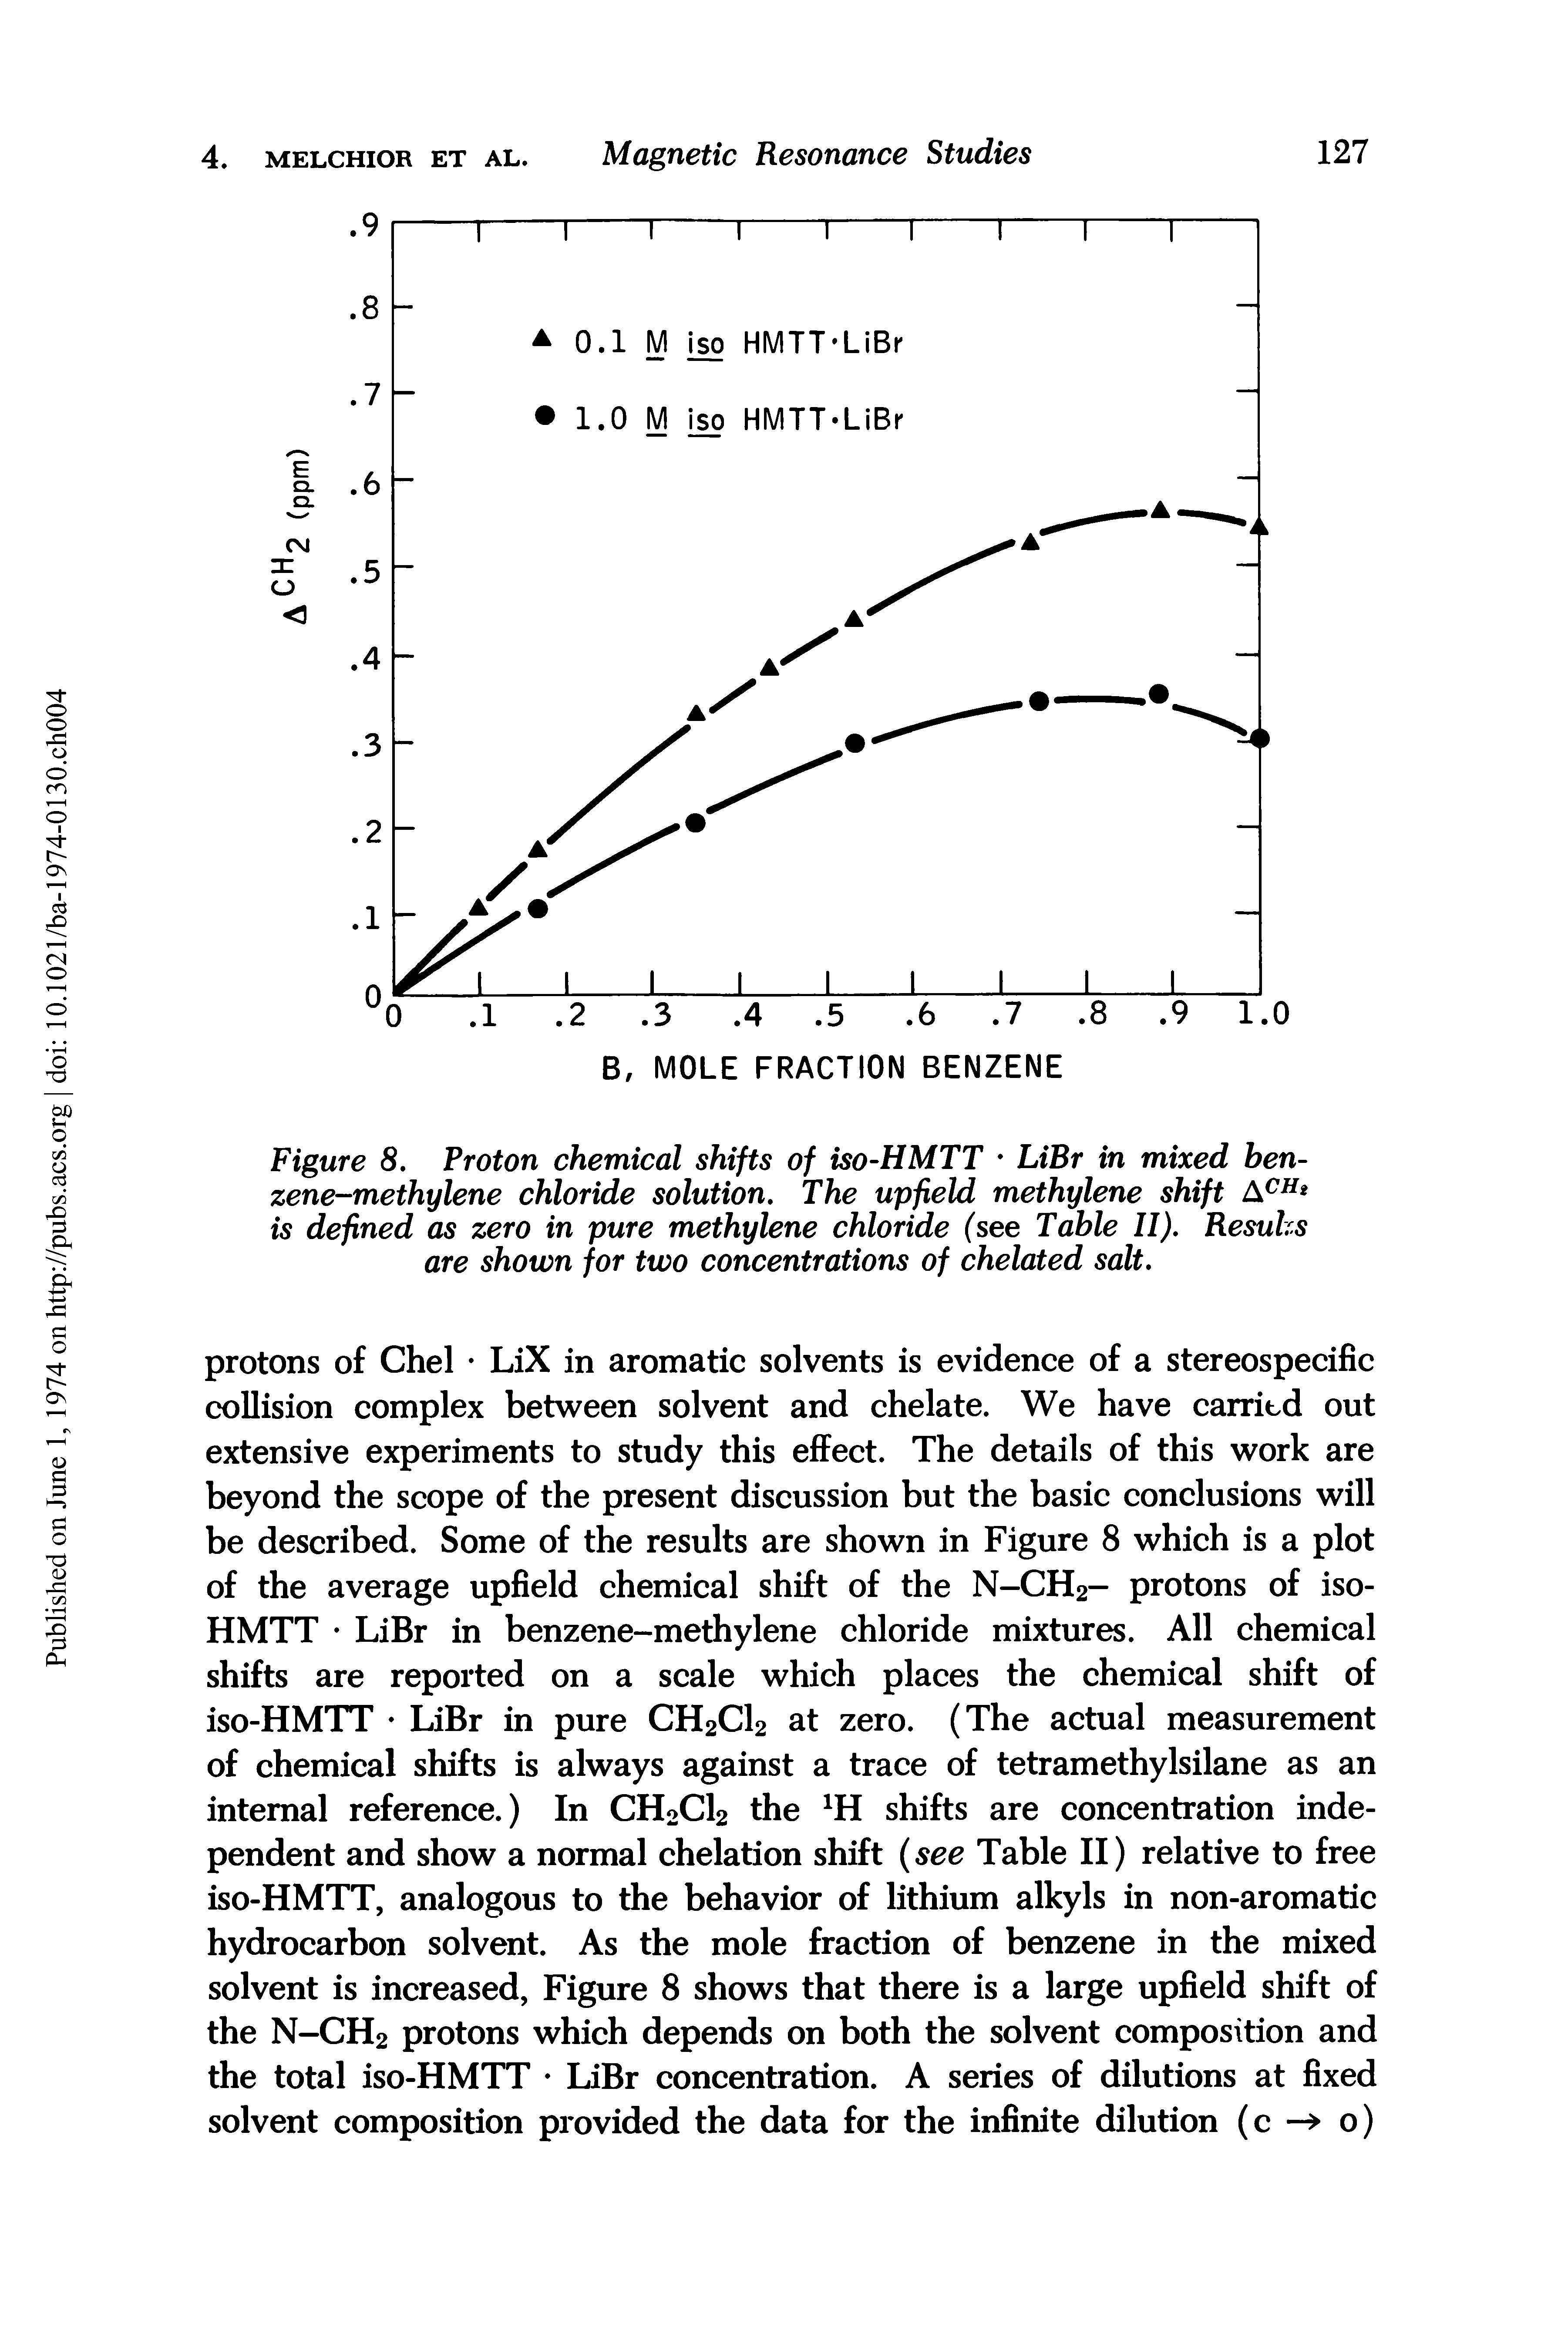 Figure 8. Proton chemical shifts of iso-HMTT LiBr in mixed benzene-methylene chloride solution. The upfield methylene shift ACH is defined as zero in pure methylene chloride (see Table II). Resuhs are shown for two concentrations of chelated salt.